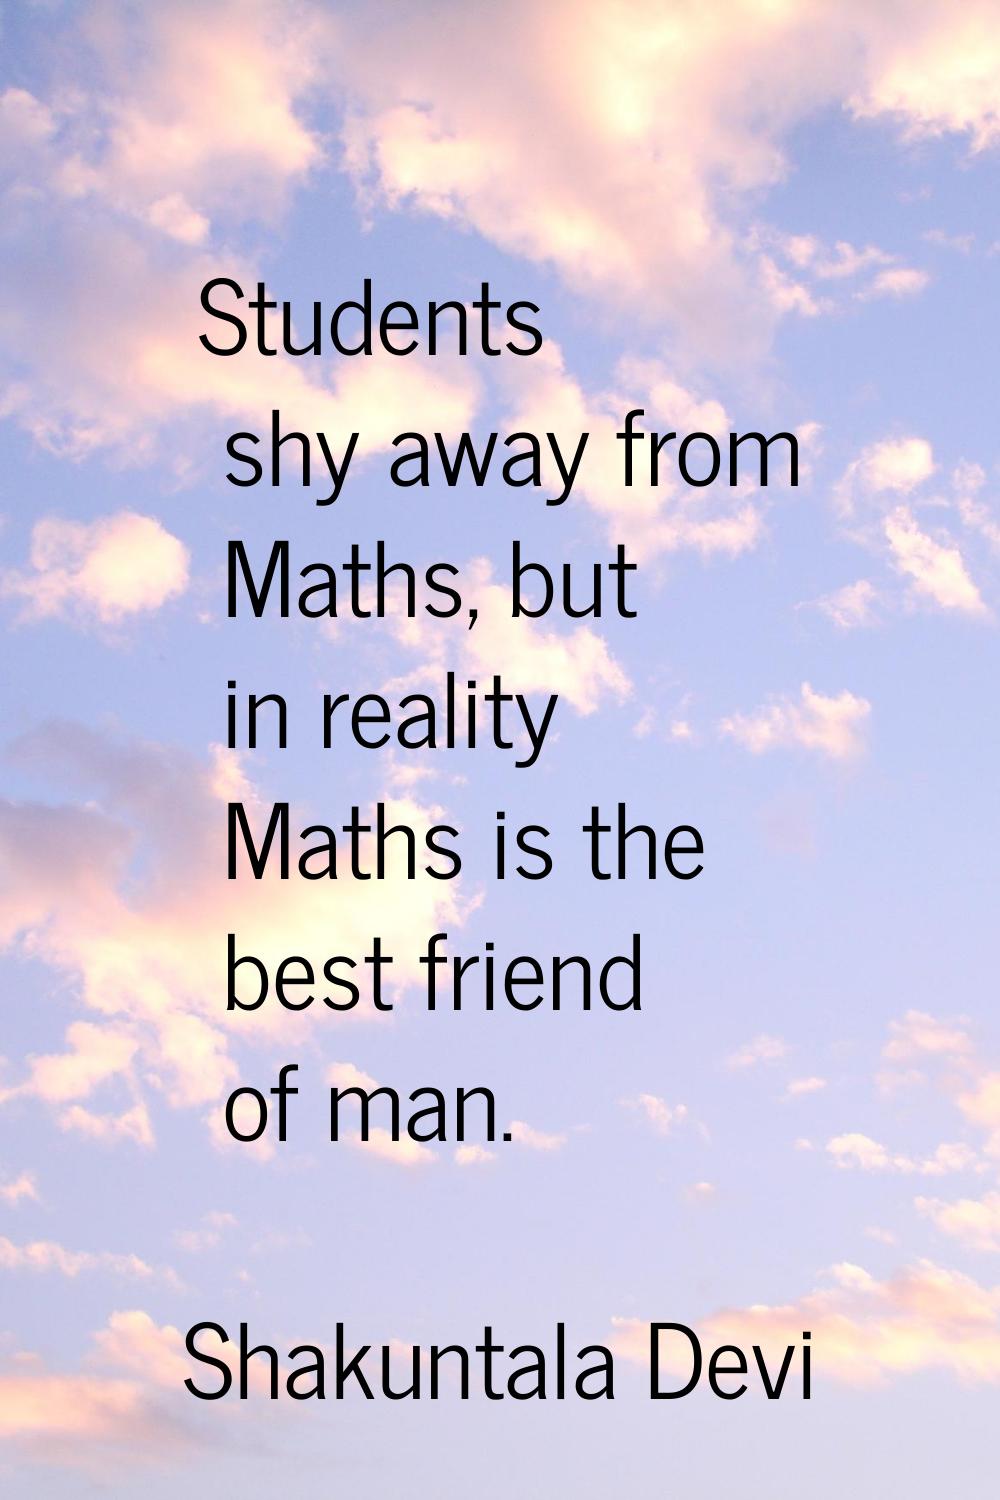 Students shy away from Maths, but in reality Maths is the best friend of man.